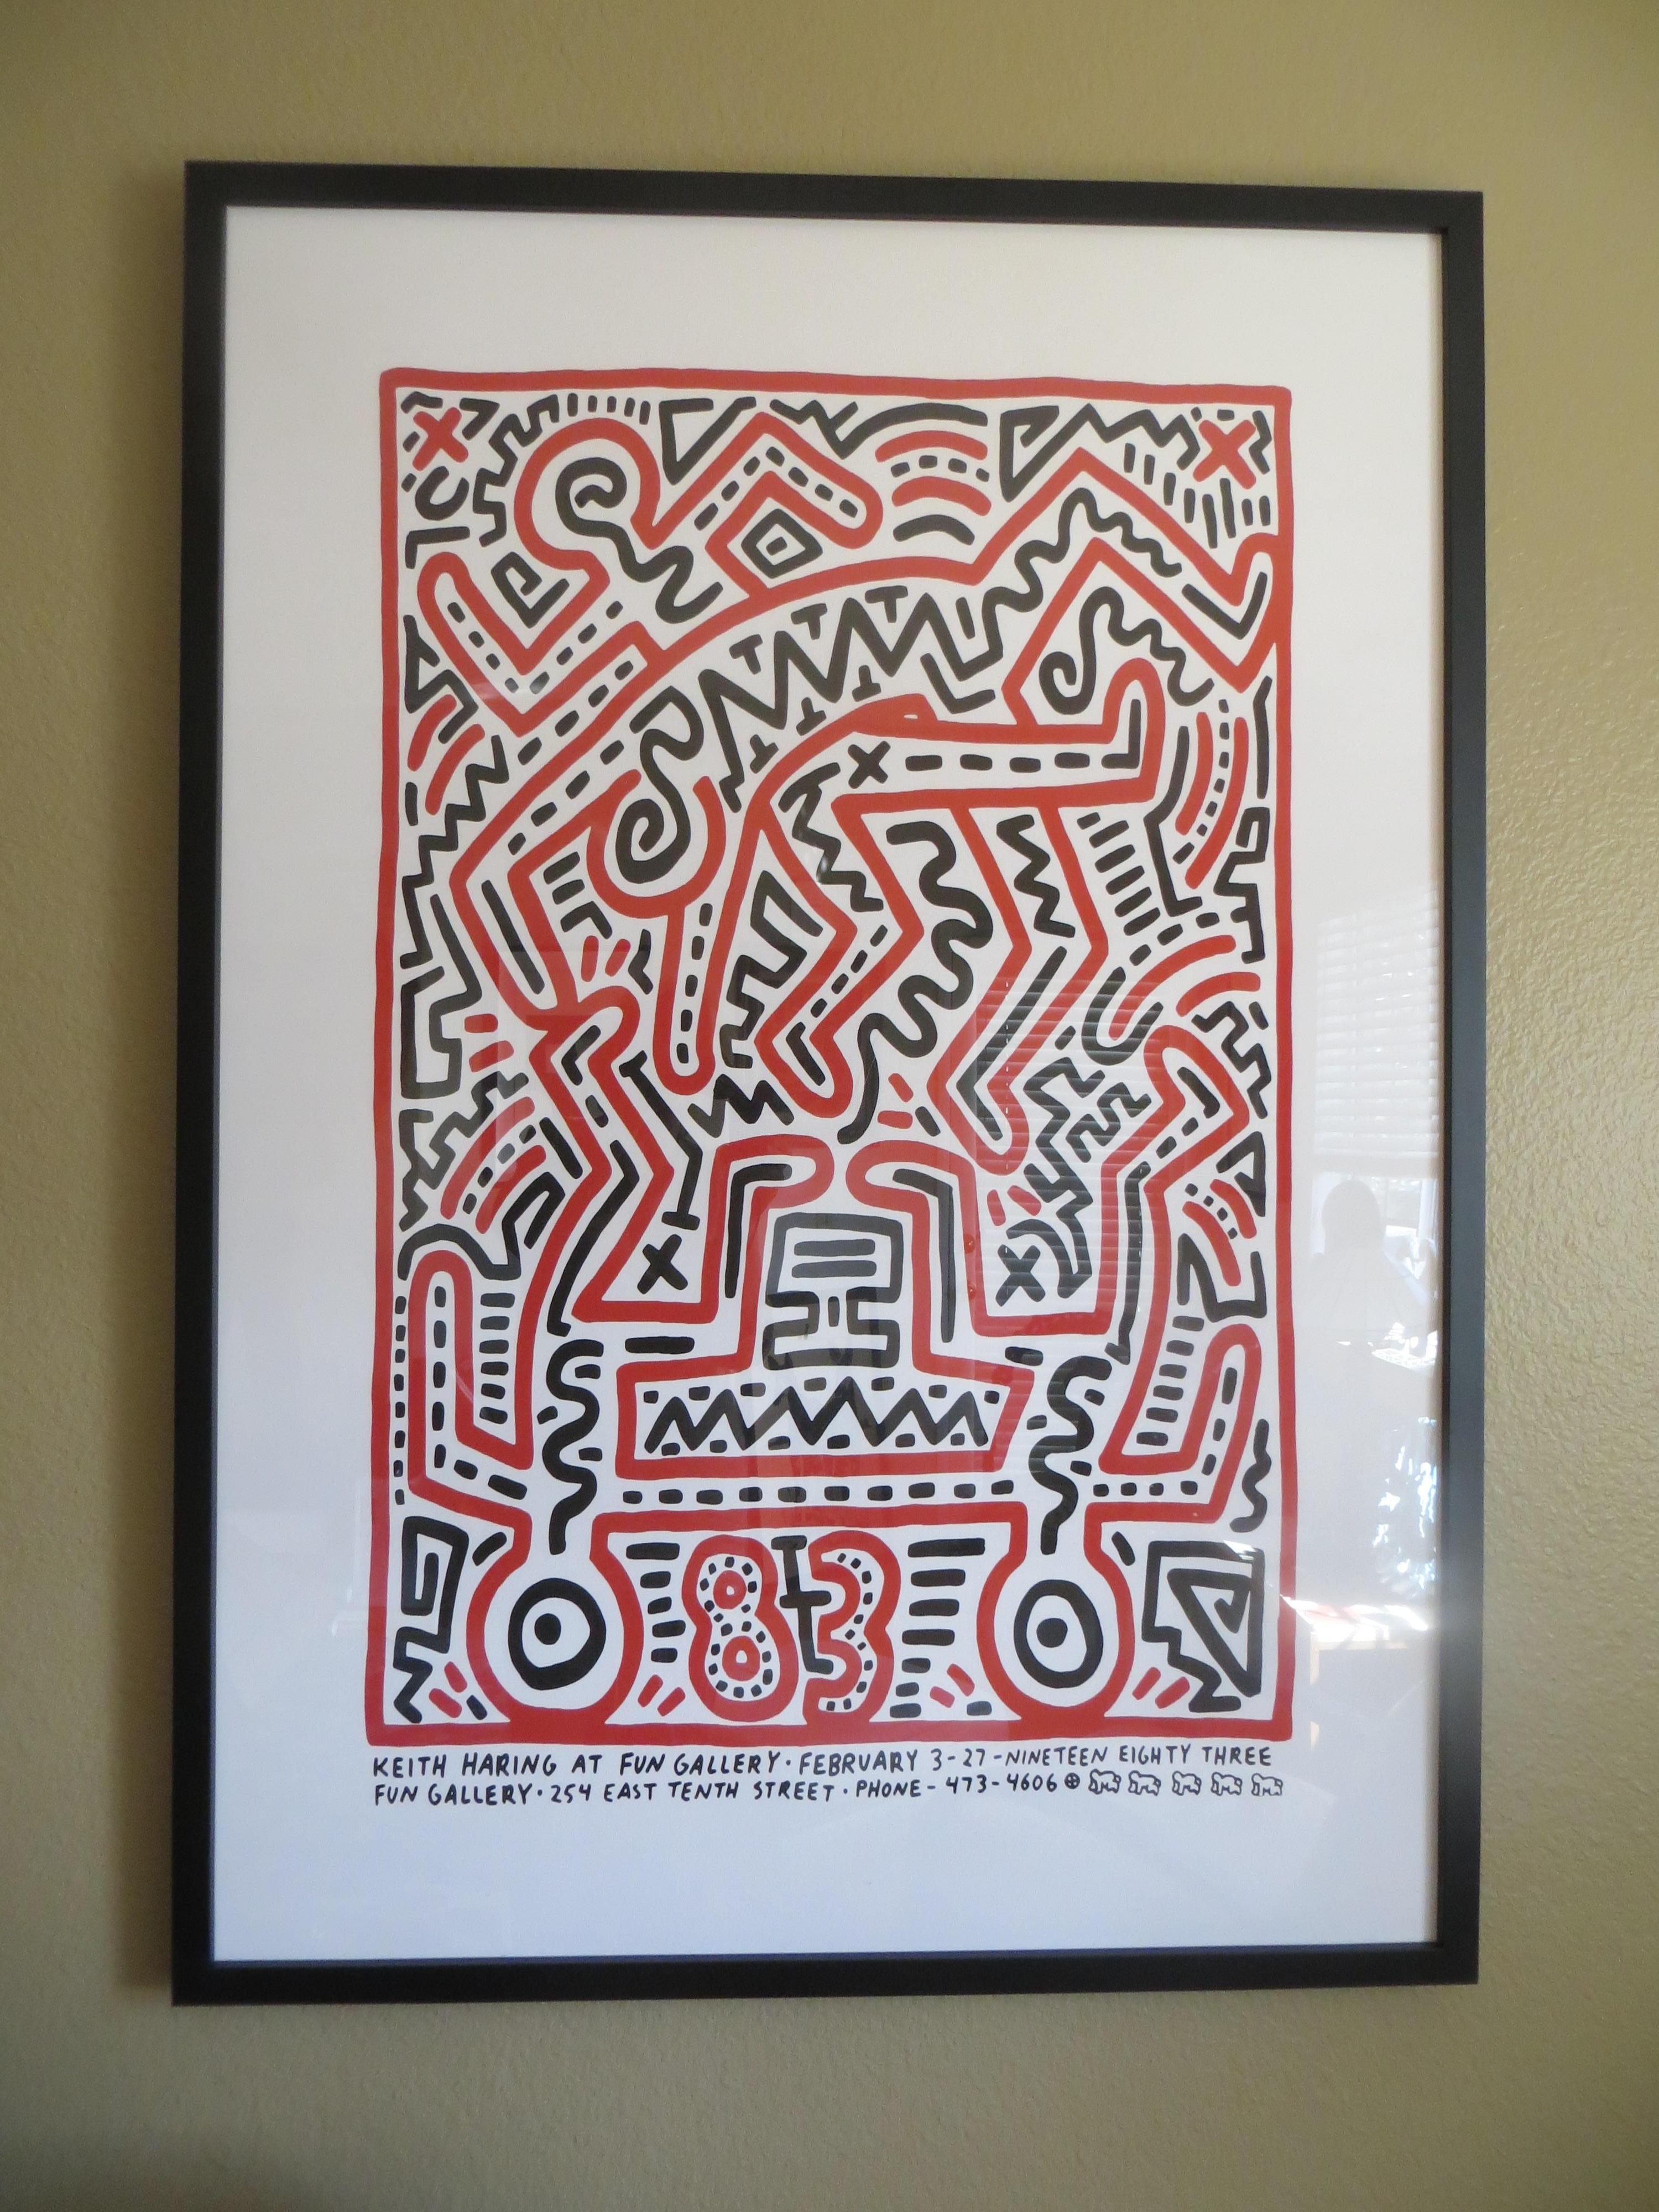 (after) Keith Haring Figurative Print - Fun Gallery Exhibition 1983  by Keith Haring Screen Print 